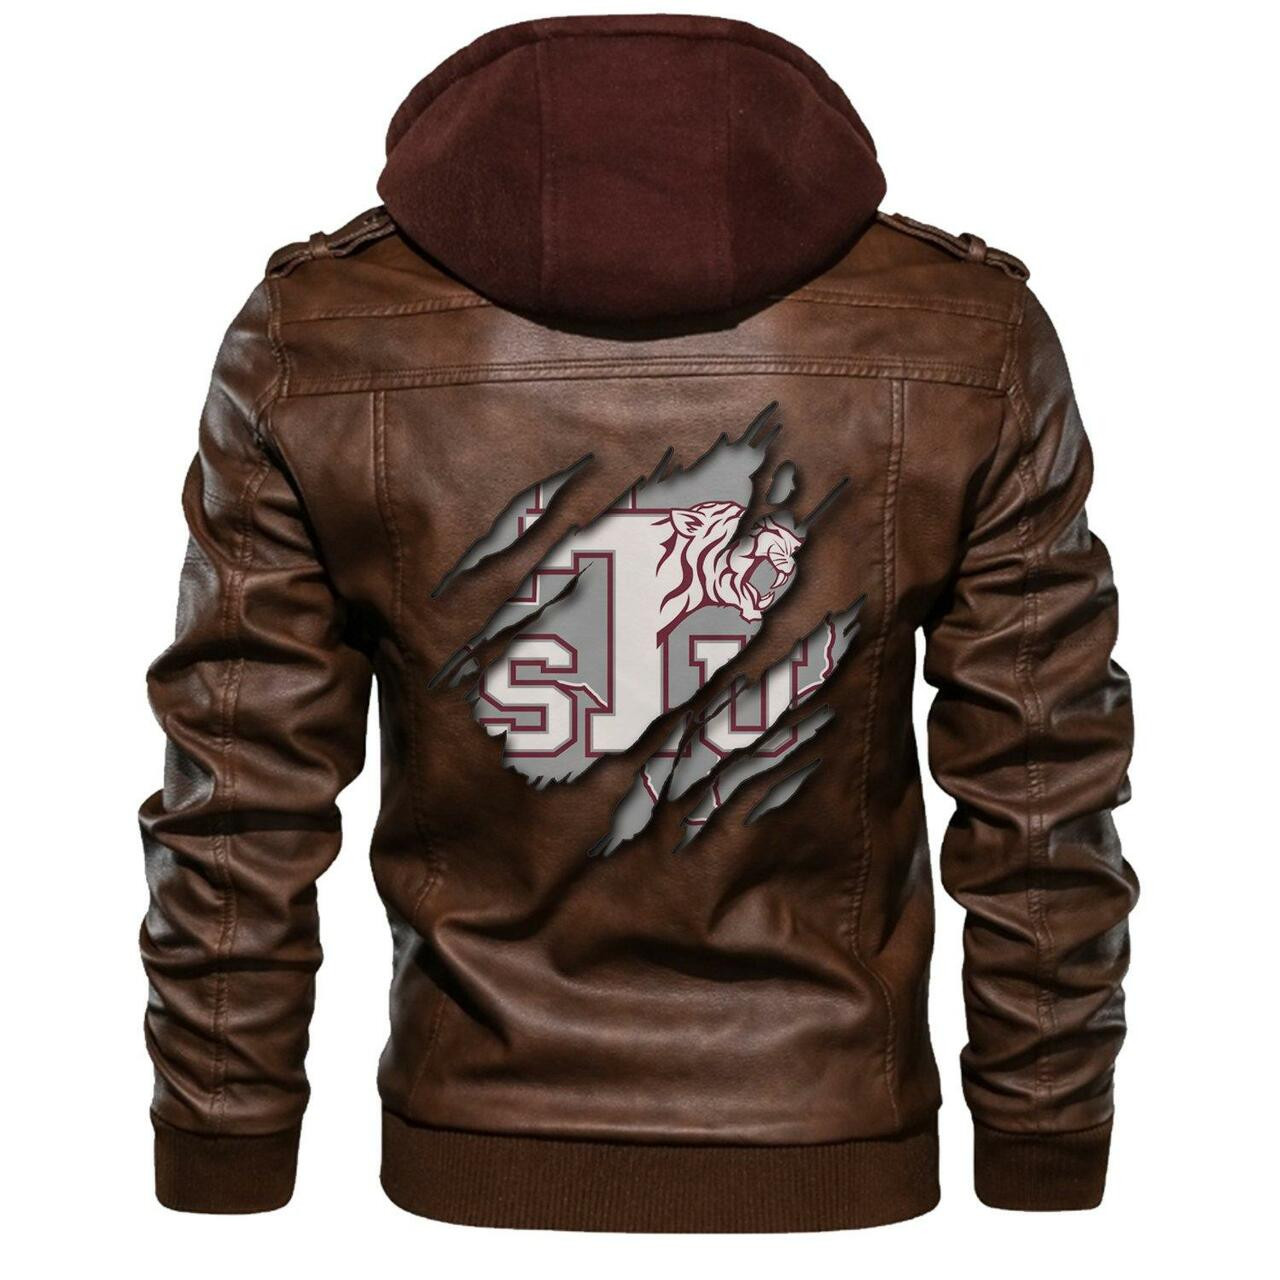 Nice leather jacket For you 158